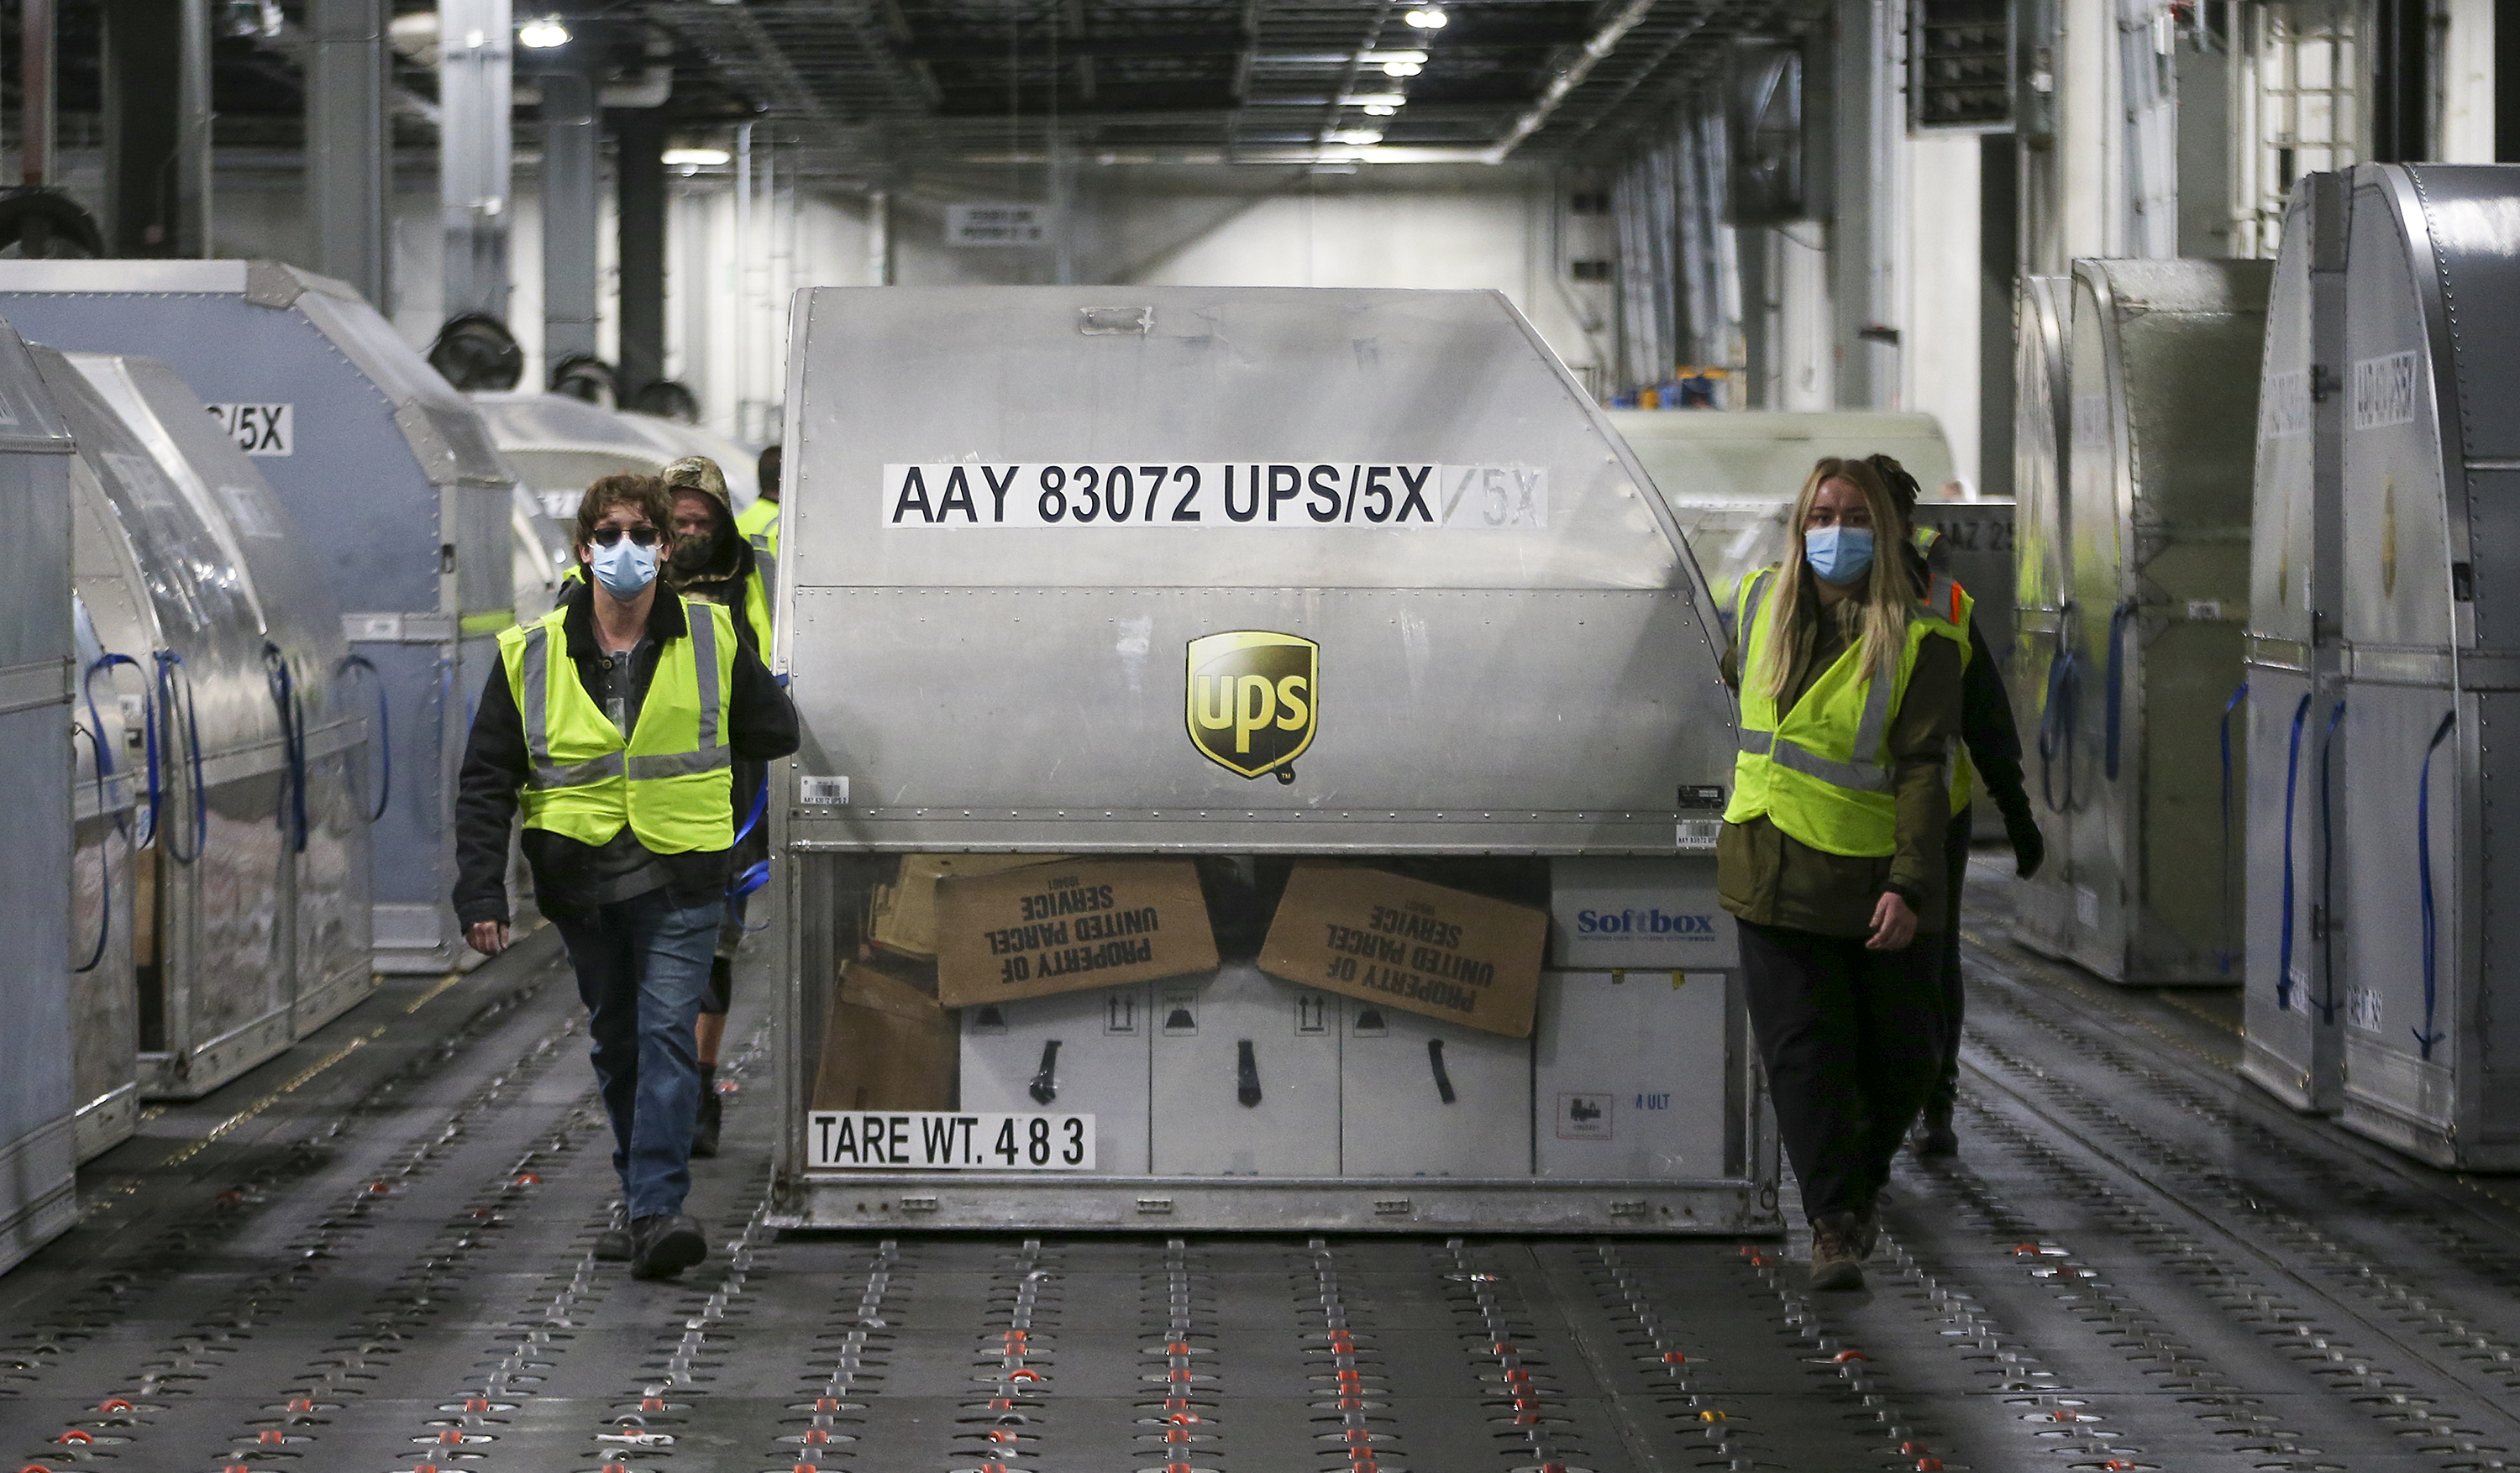 UPS employees move shipping containers containing the Pfizer vaccine inside a sorting facility in Louisville, Kentucky, on December 13.